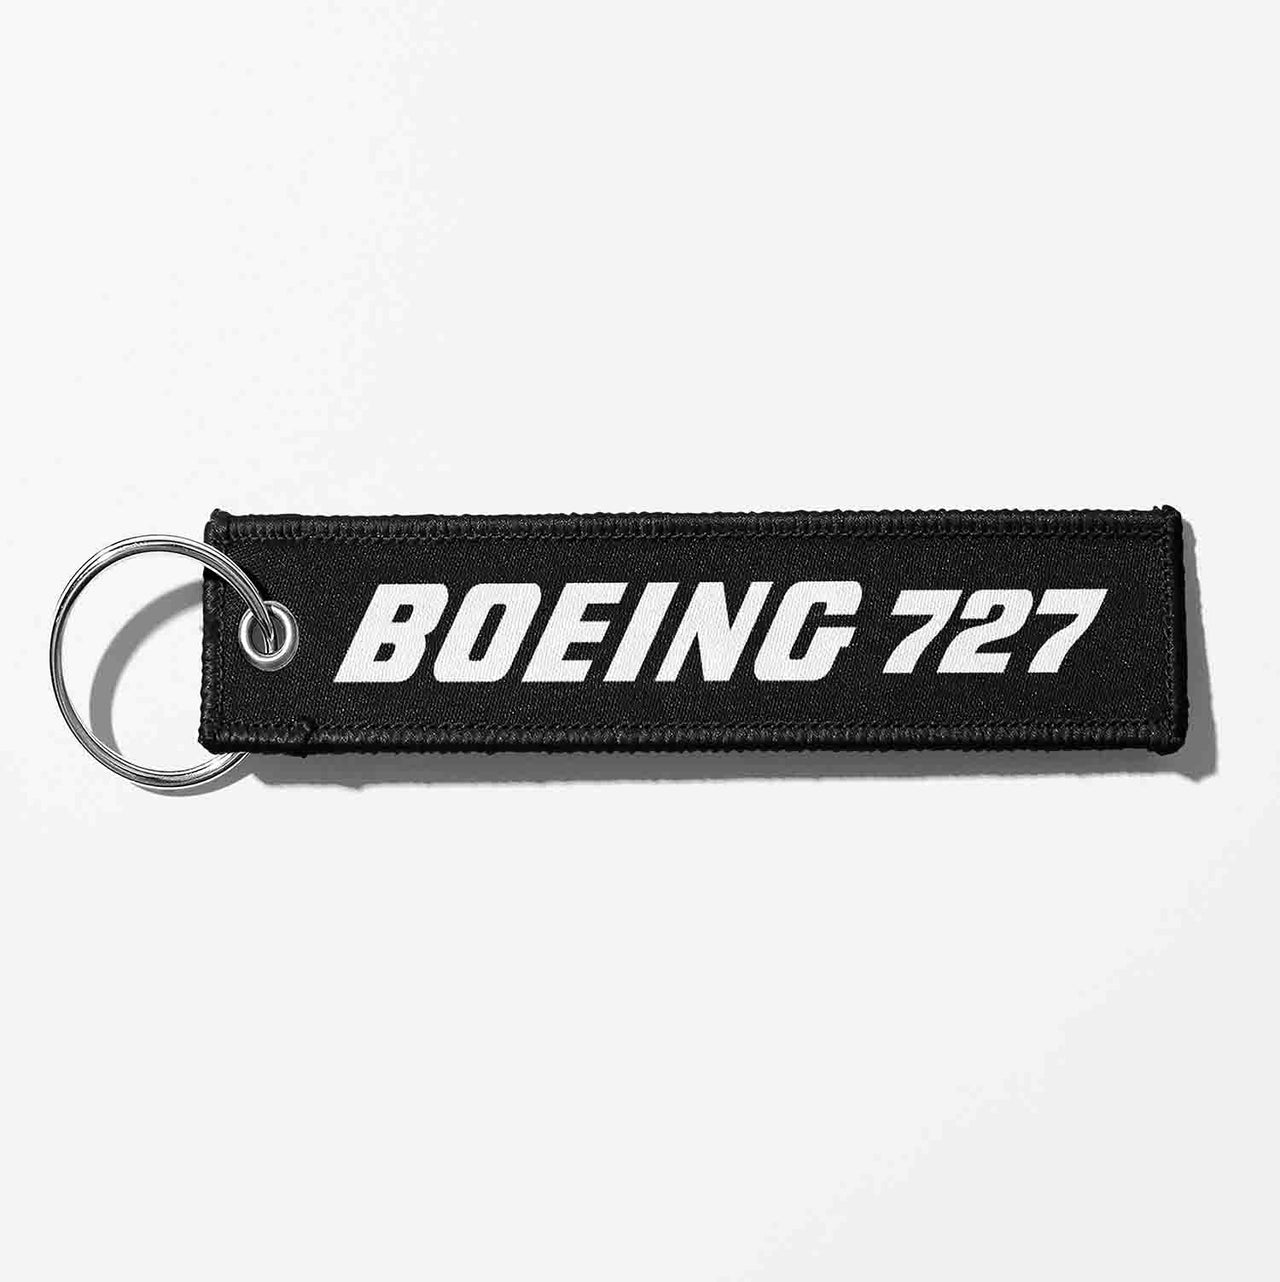 Boeing 727 & Text Designed Key Chains